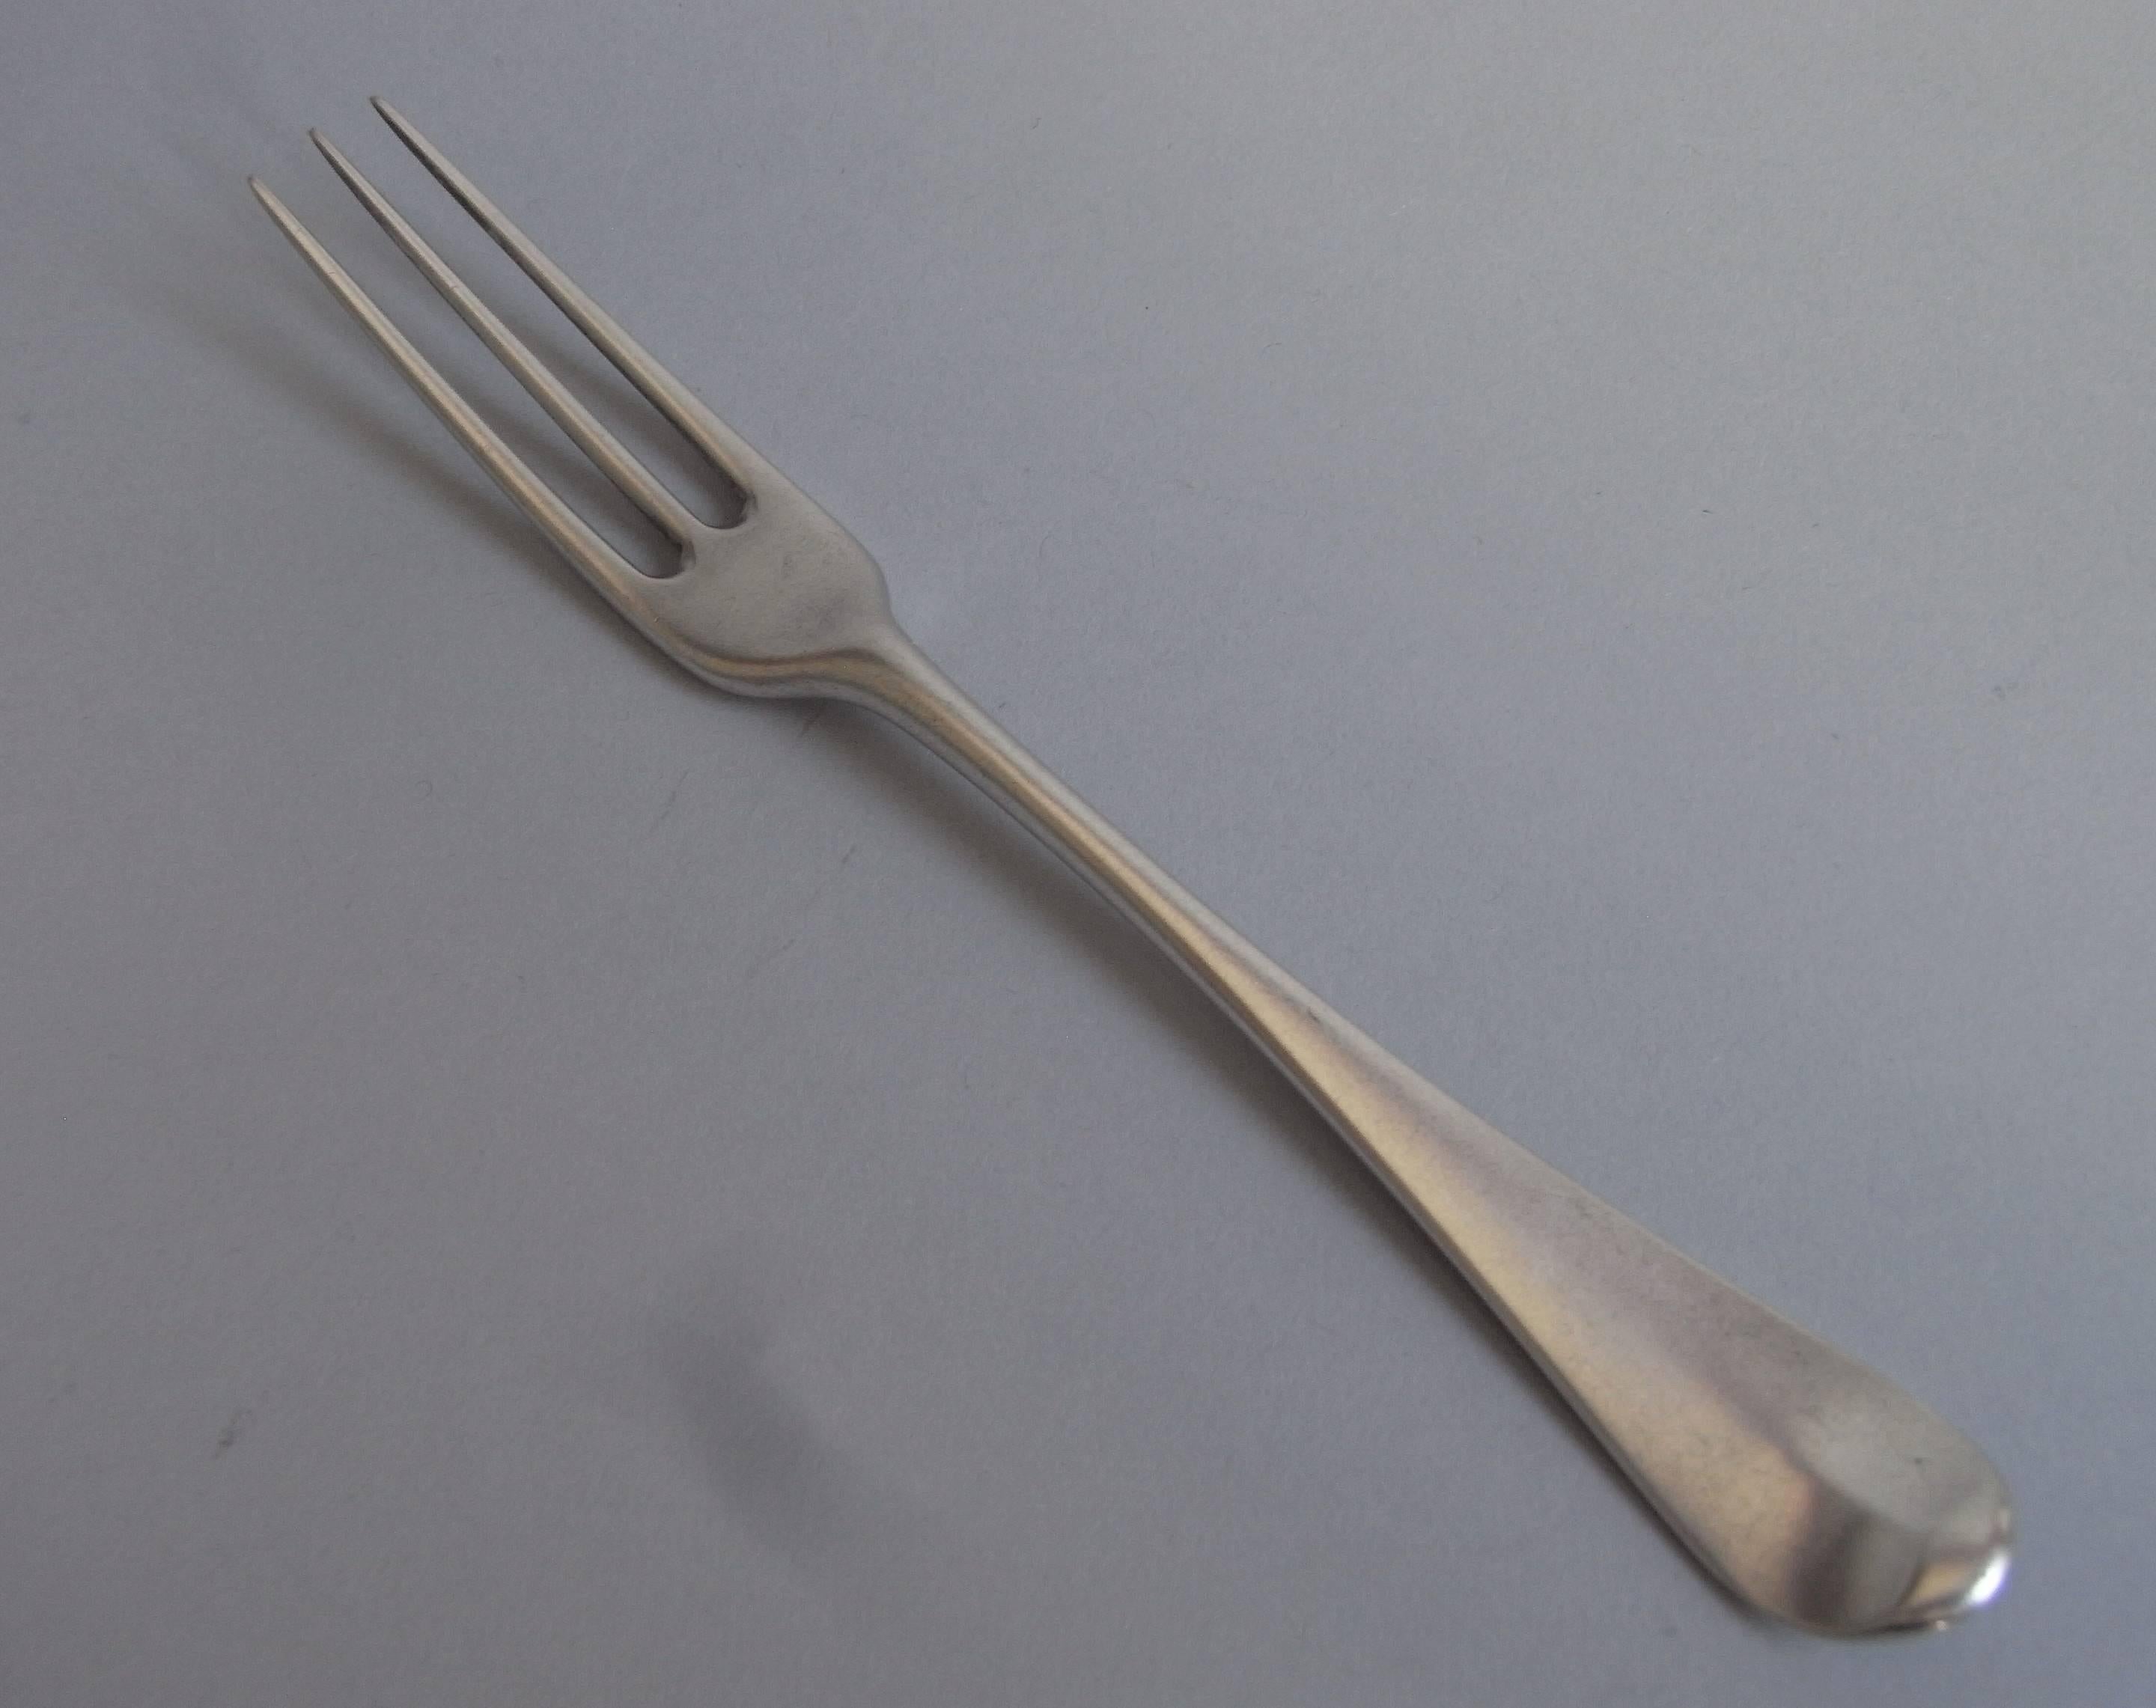 The table forks are modelled in the rare Hanoverian three prong style, with elegant long tines. The reverse of each is engraved with the contemporary script initial 